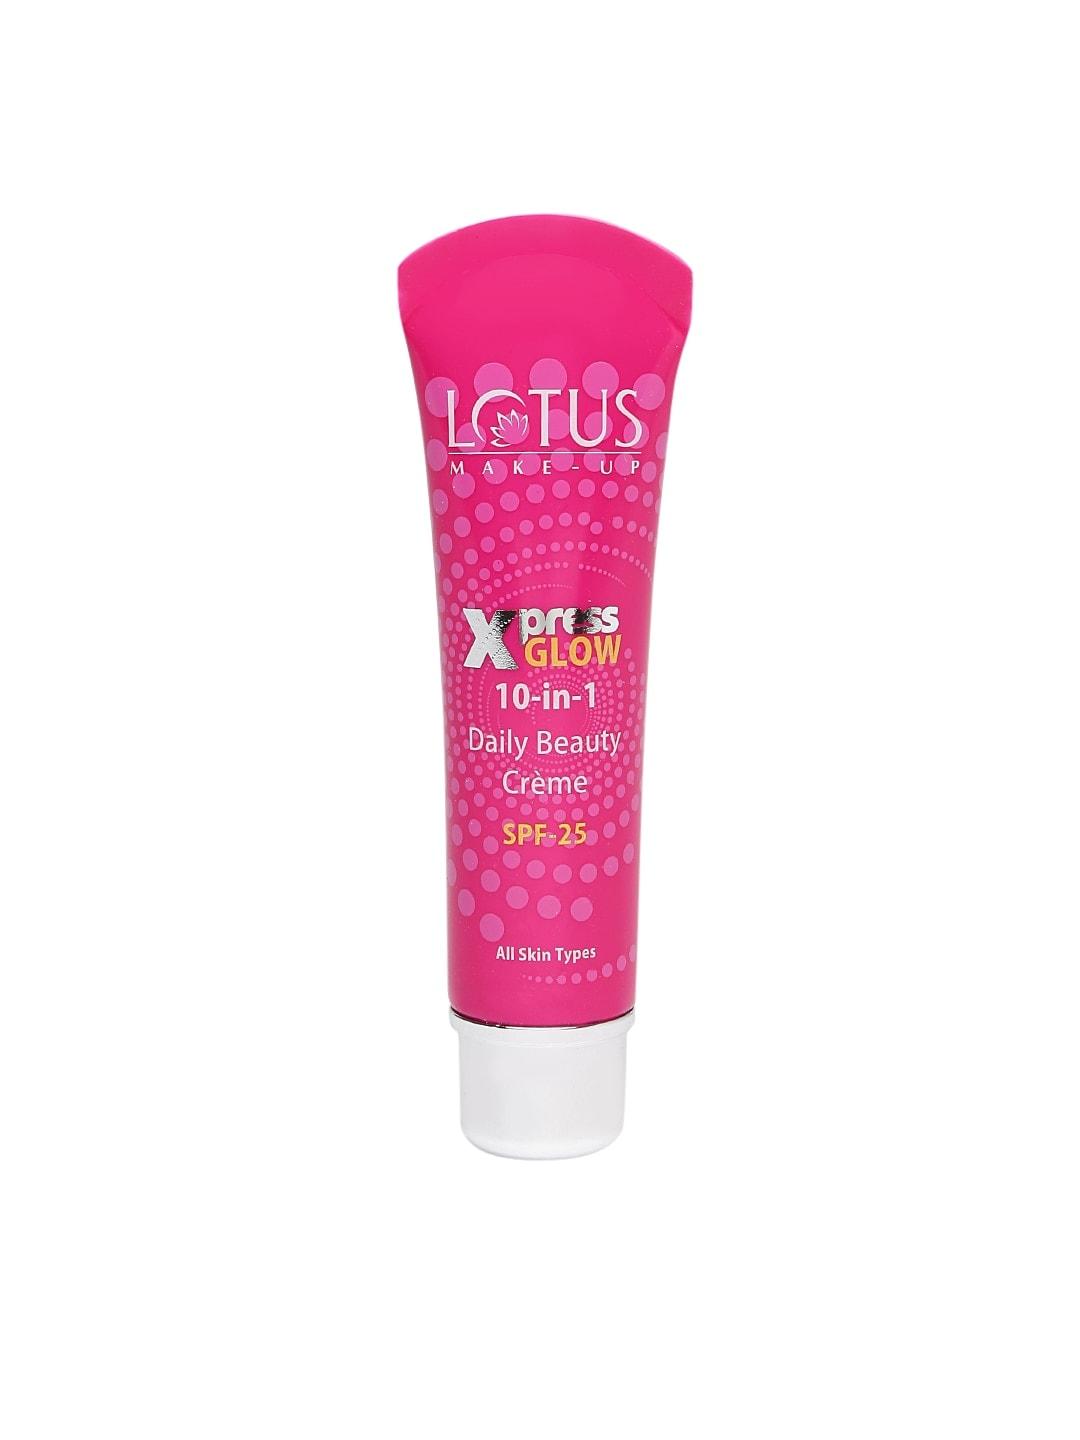 lotus-herbals-sustainable-xpress-glow-10-in-1-daily-beauty-creme---royal-pearl-30g